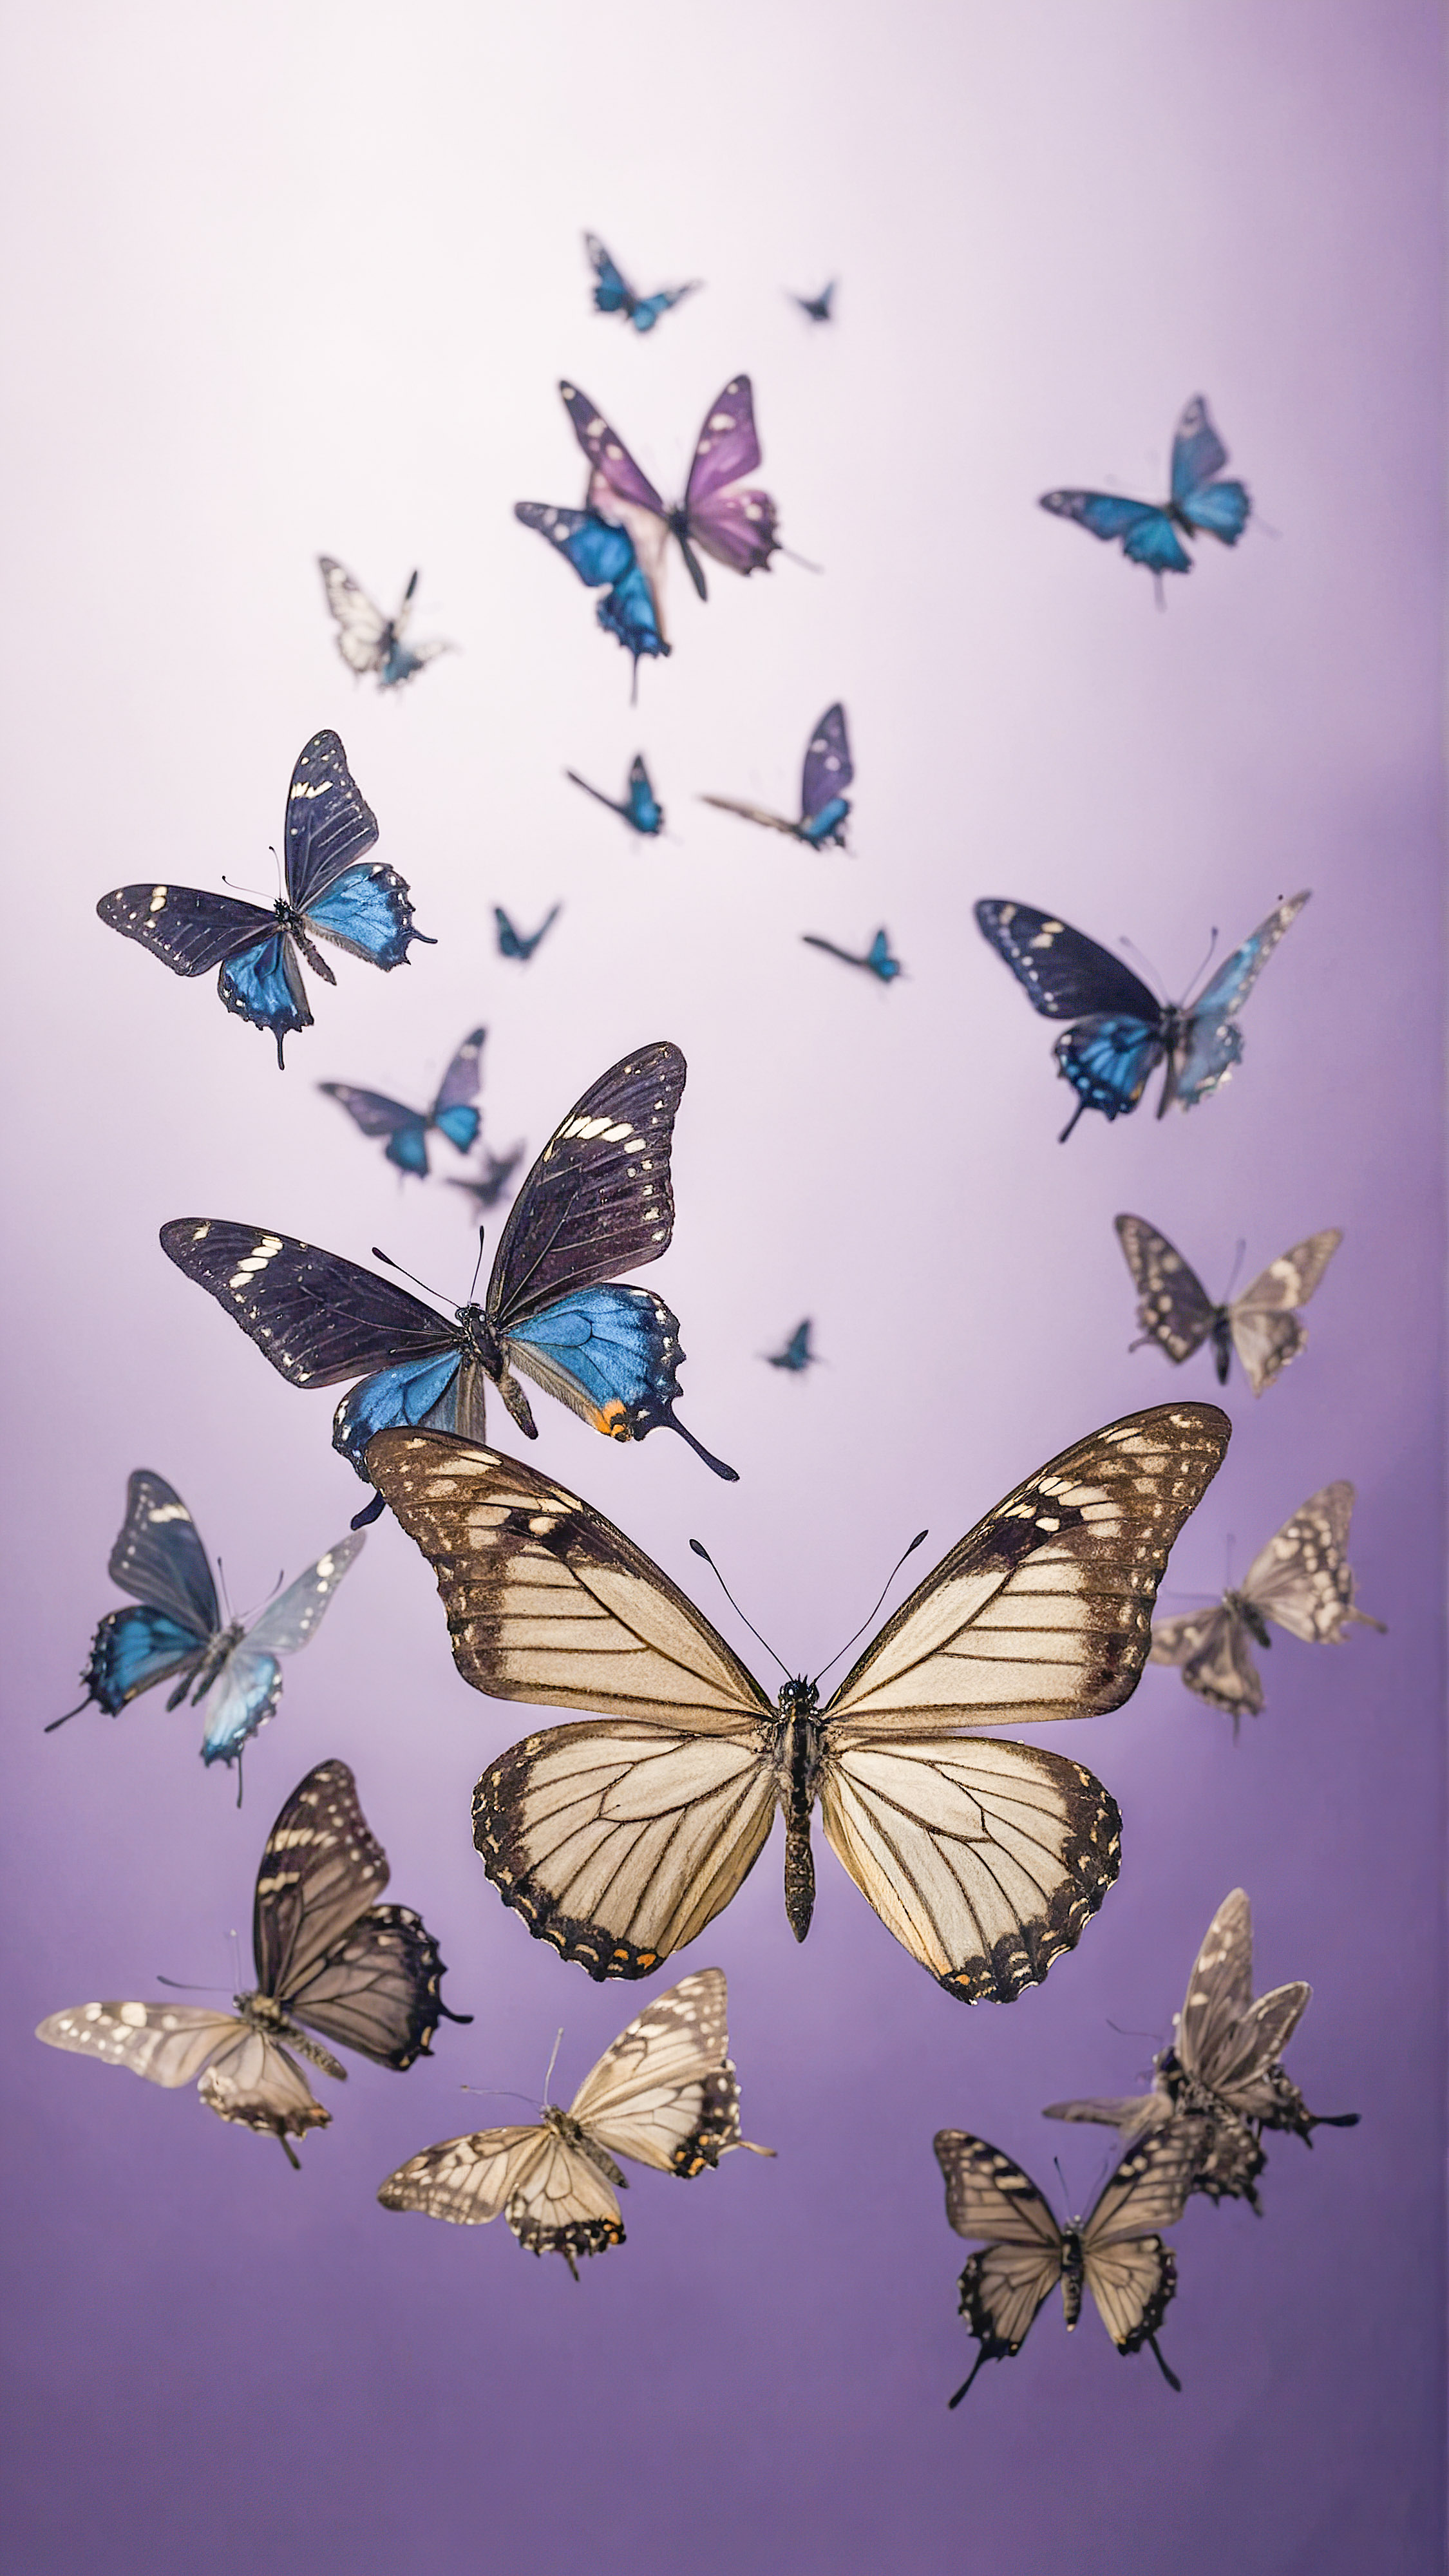 Experience the soothing calm with our cute aesthetic backgrounds for iPhone, featuring small, dark butterflies fluttering against a soft purple background.